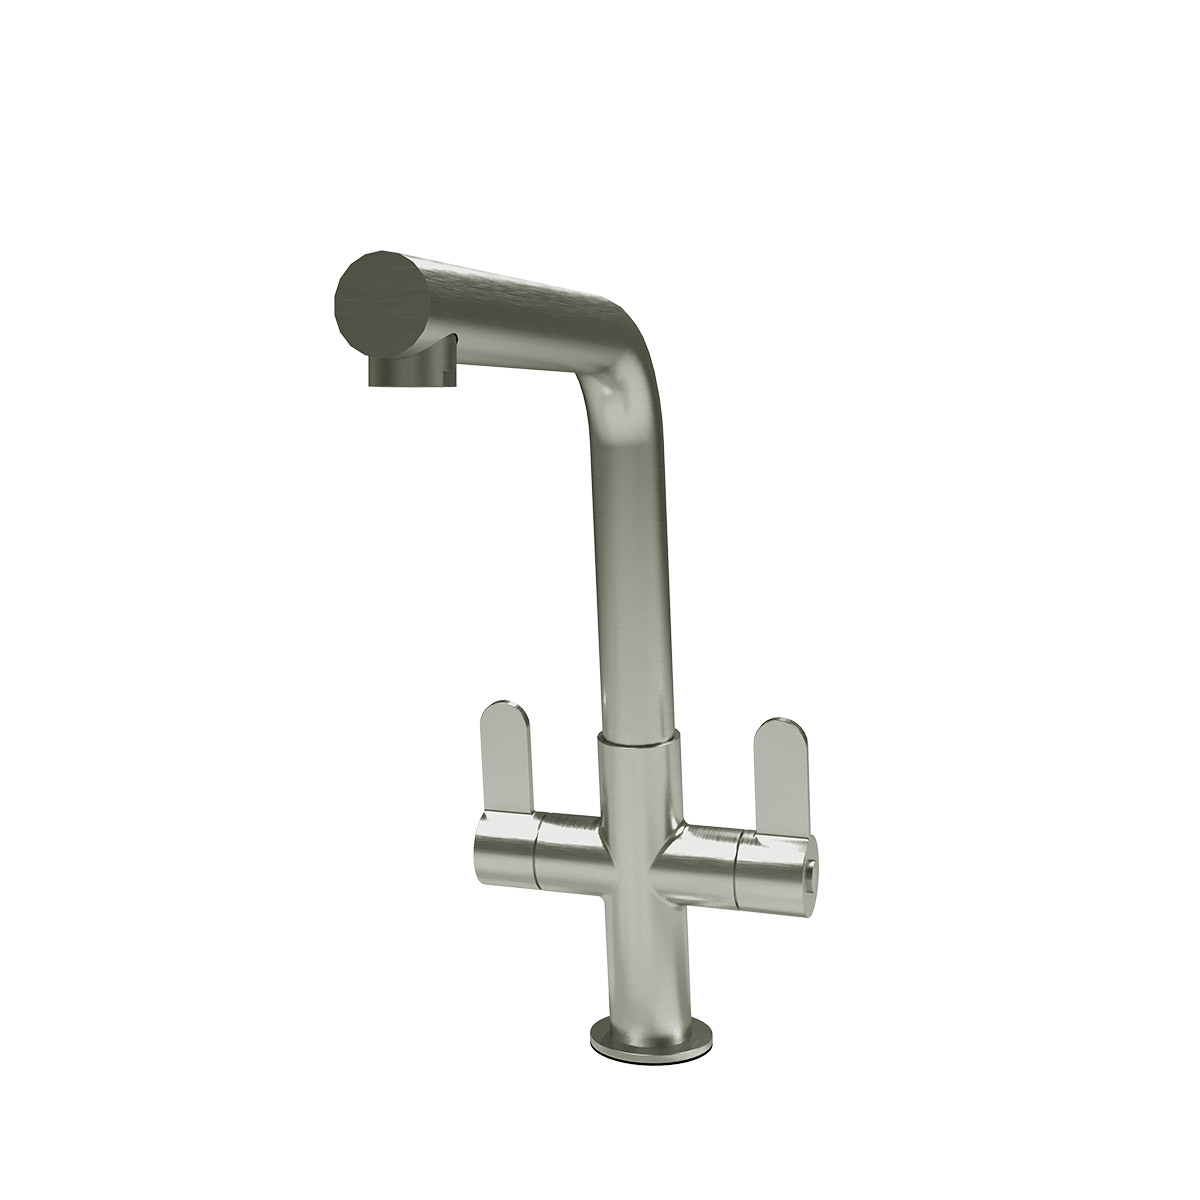 Ida dual lever kitchen tap in brushed chrome